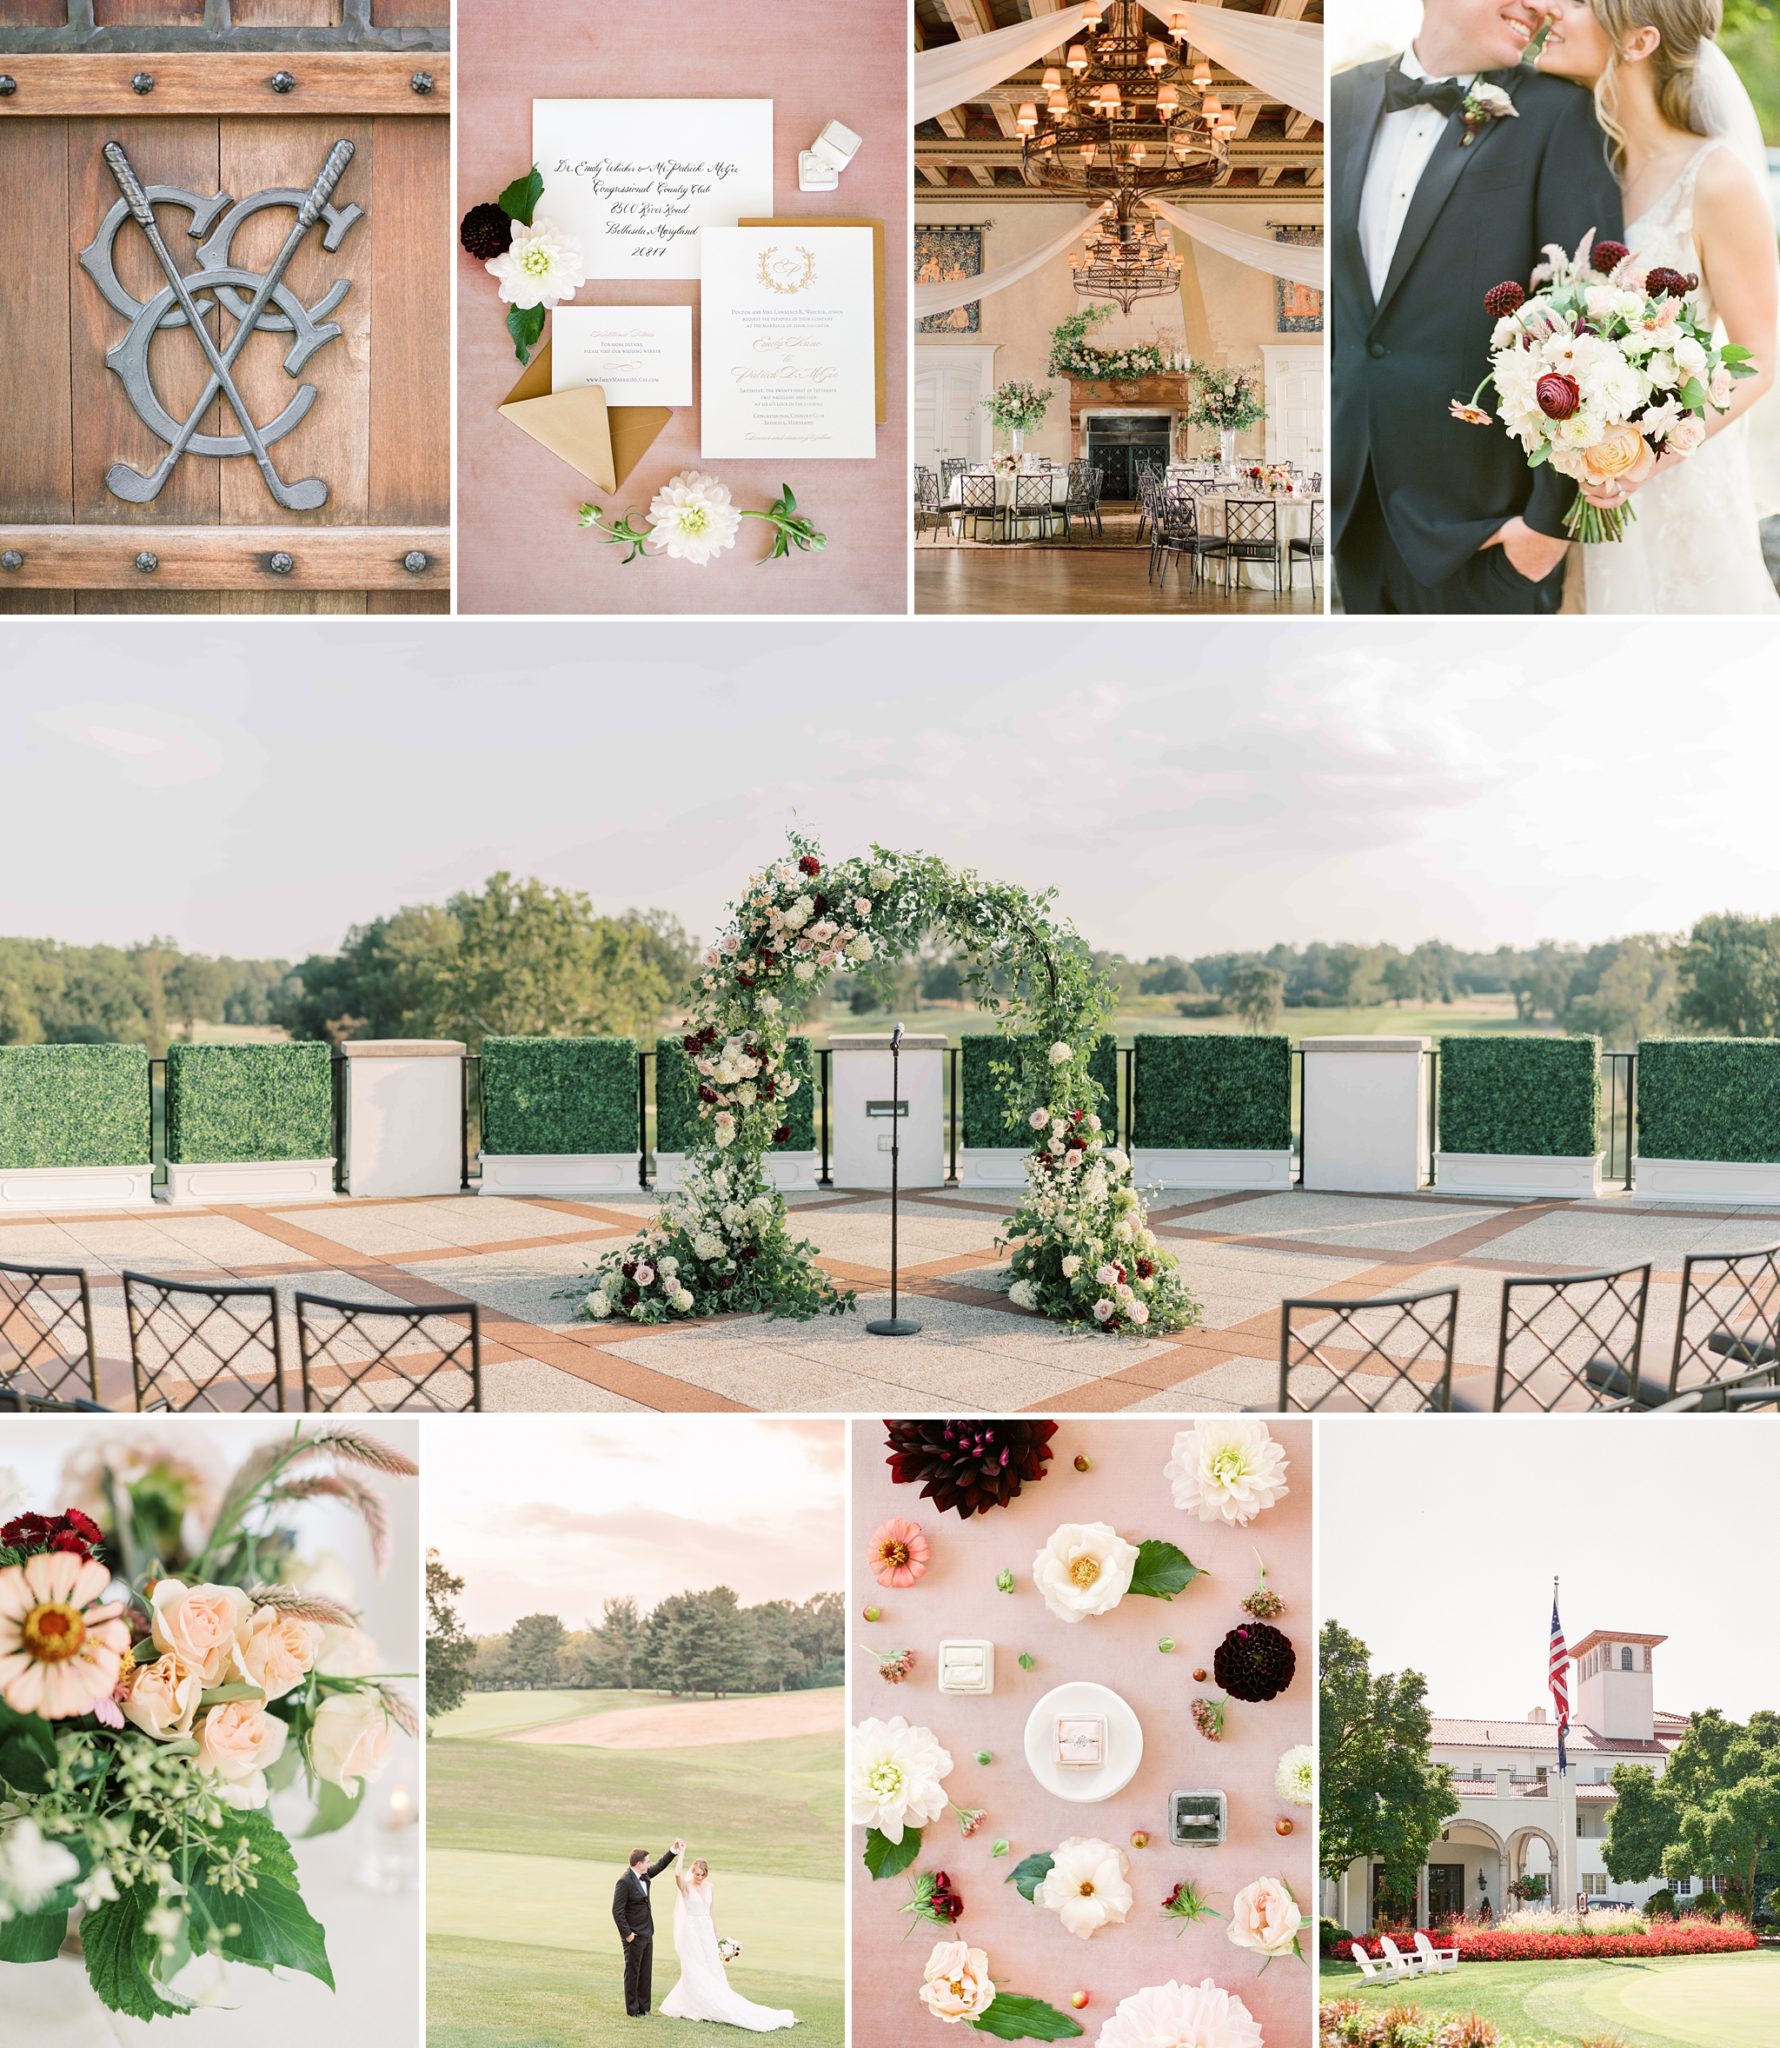 To wrap up the 2019 season, this Washington, DC wedding photographer is sharing superlatives from the most stunning affairs of the year! 